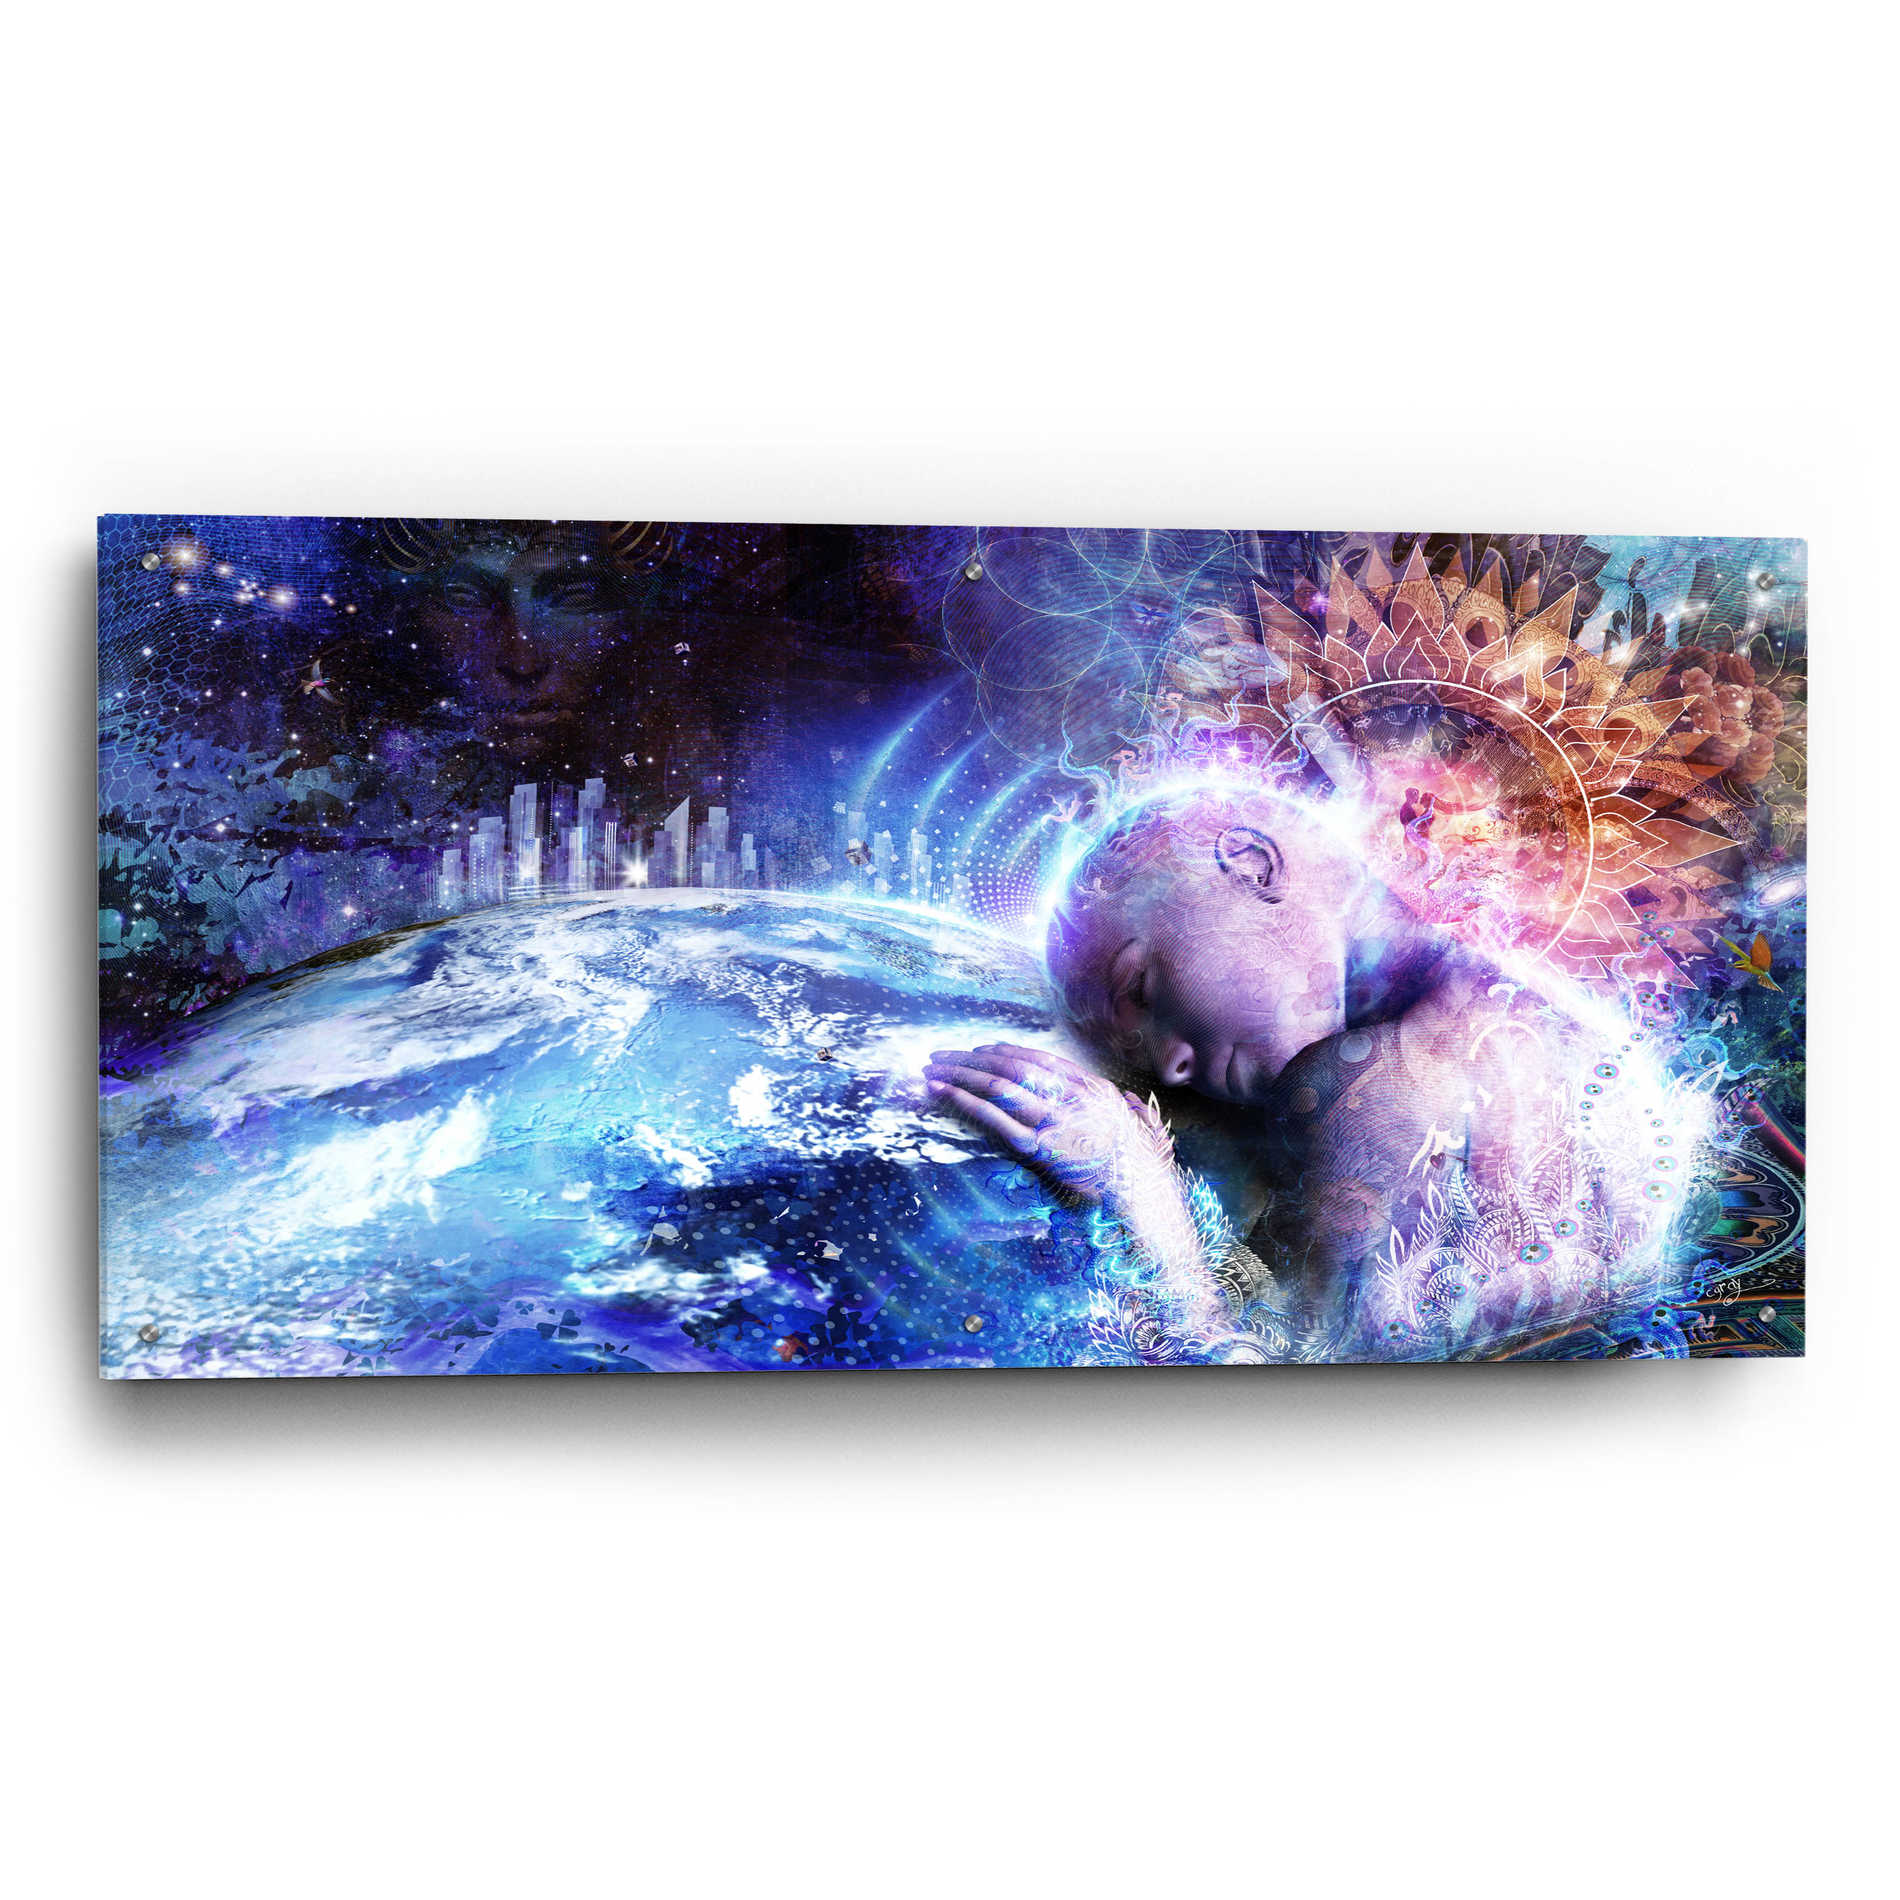 Epic Art 'A Prayer For The Earth' by Cameron Gray, Acrylic Glass Wall Art,48x24